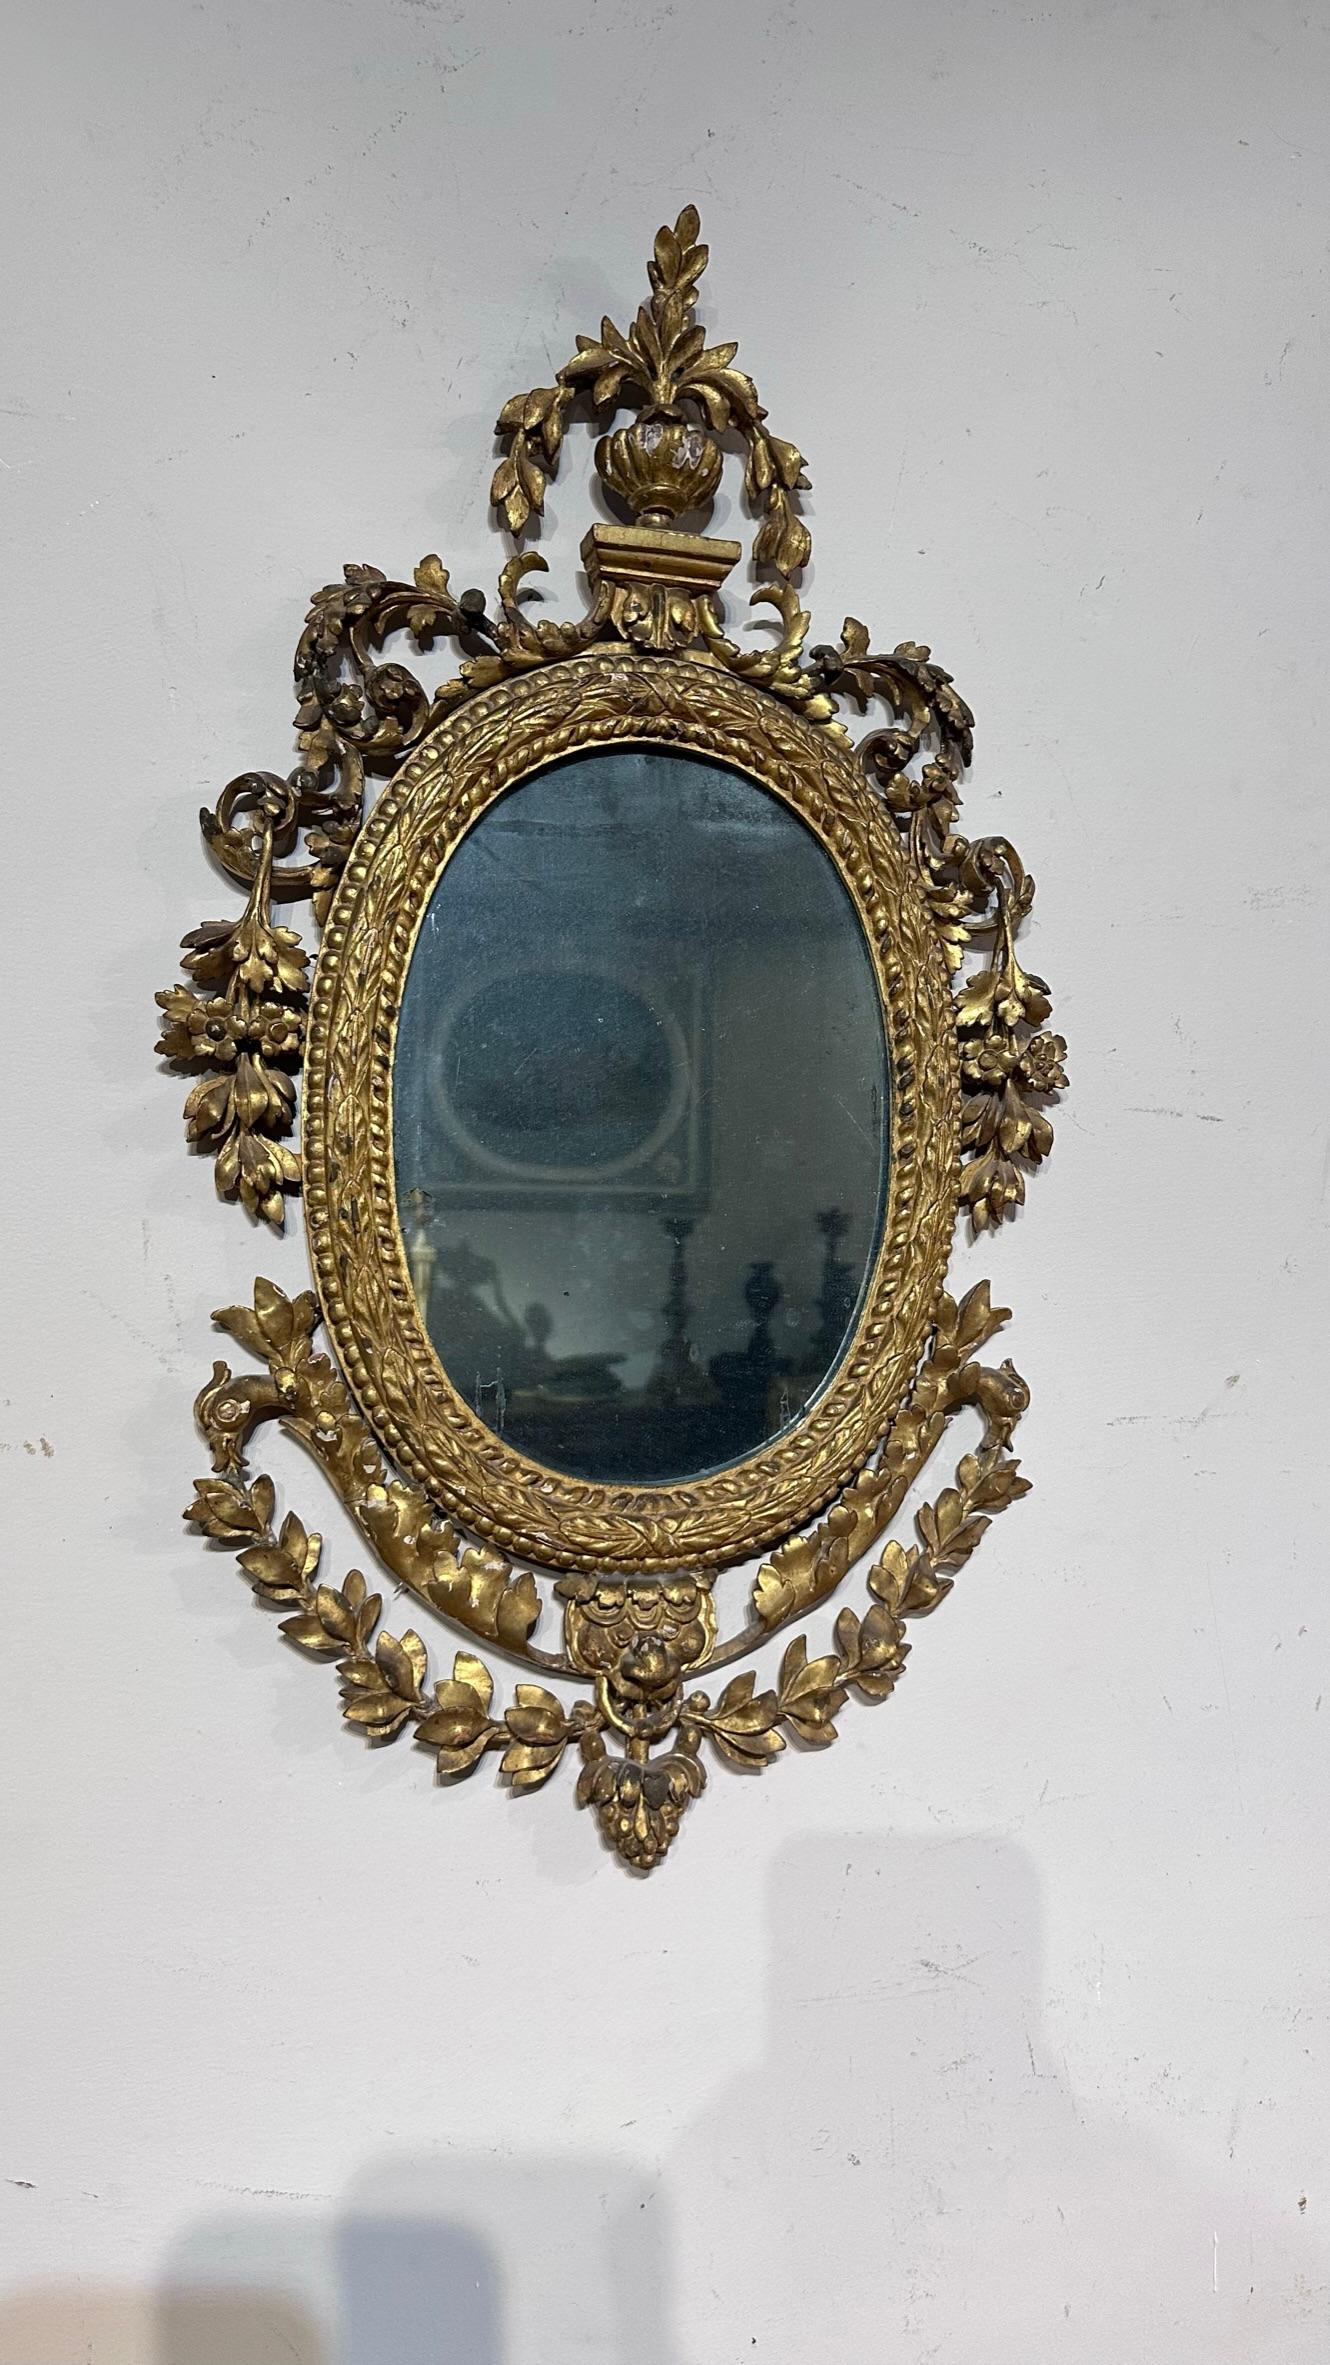 Oval mirror in finely carved pine wood and gilded with gold leaf and original mercury light. Typical Italian manufacture in the Louis XVI style of the late 1700s.

Measures HxWxD 64 x 35 x 3.5cm